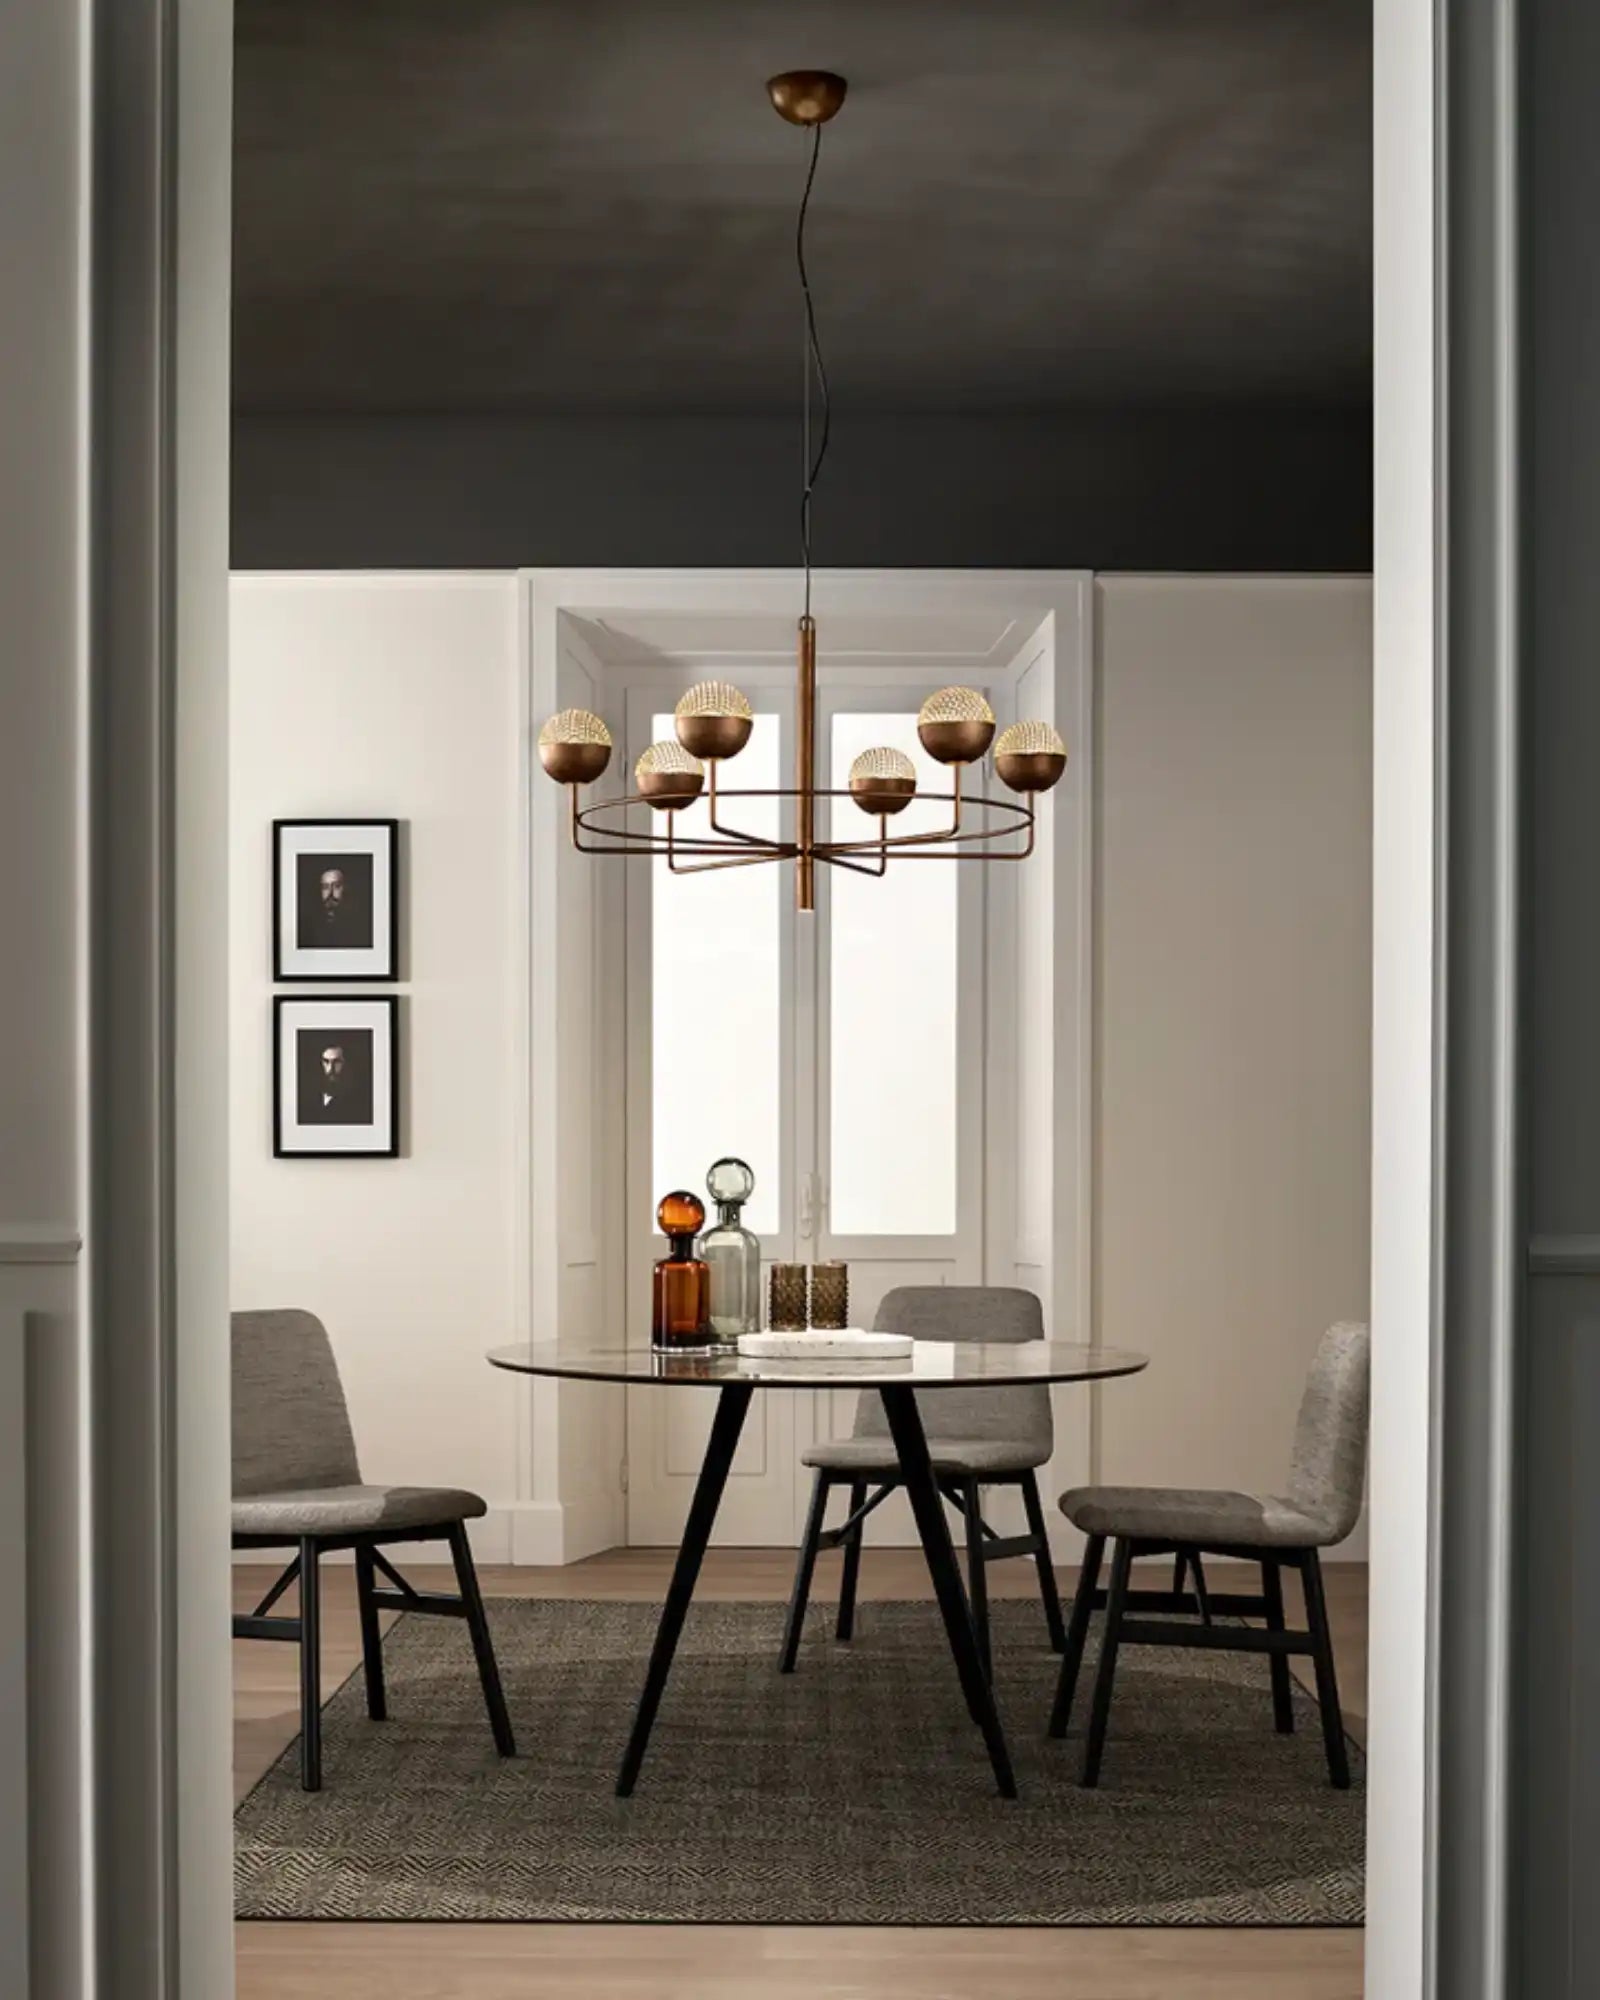 Iglu Chandelier by Masiero Lighting featured within a contemporary dining area | Nook Collections